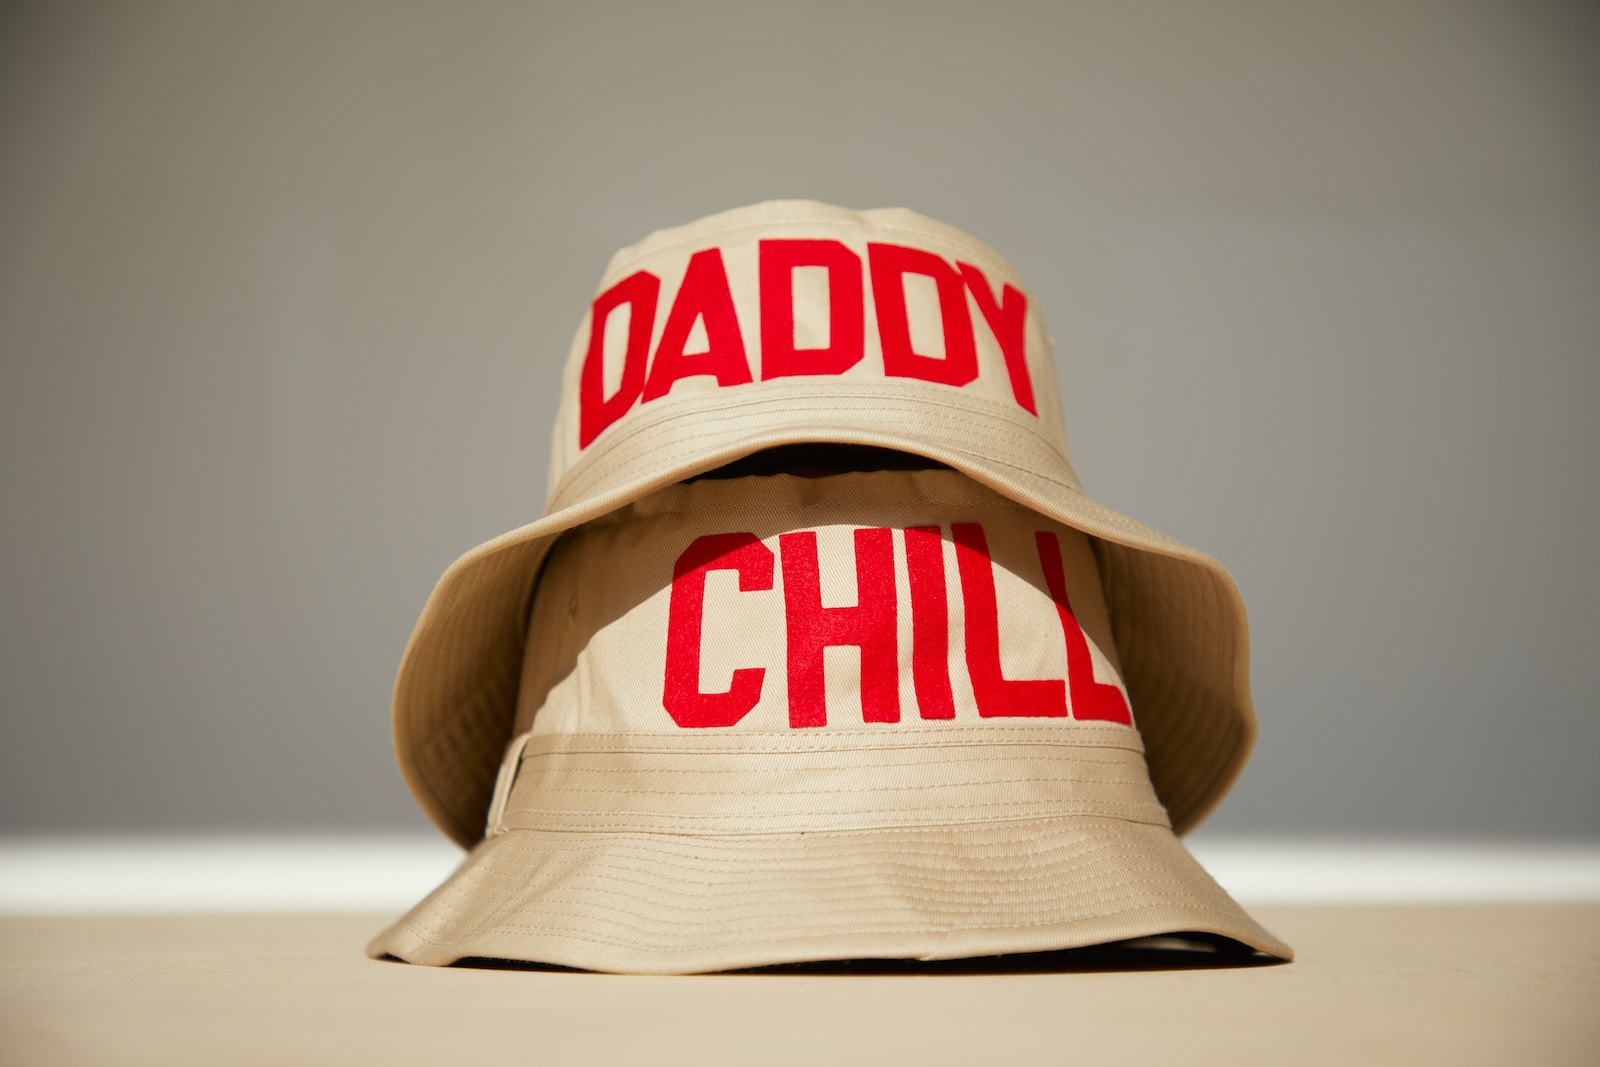 a hat with the words daddy and chill printed on it